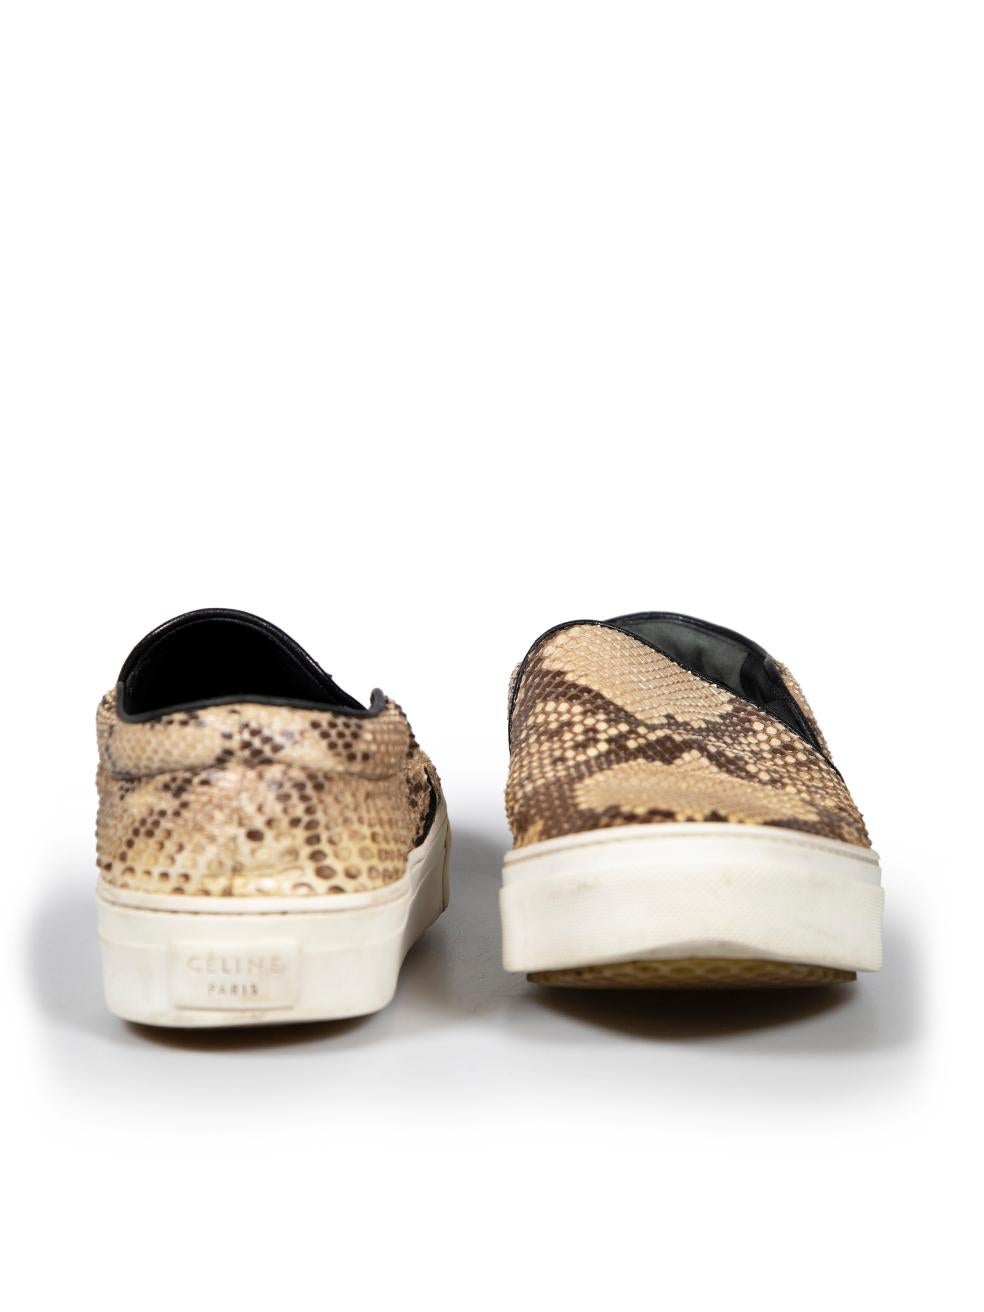 Céline Beige Snakeskin Leather Slip On Trainers Size IT 38 In Good Condition For Sale In London, GB